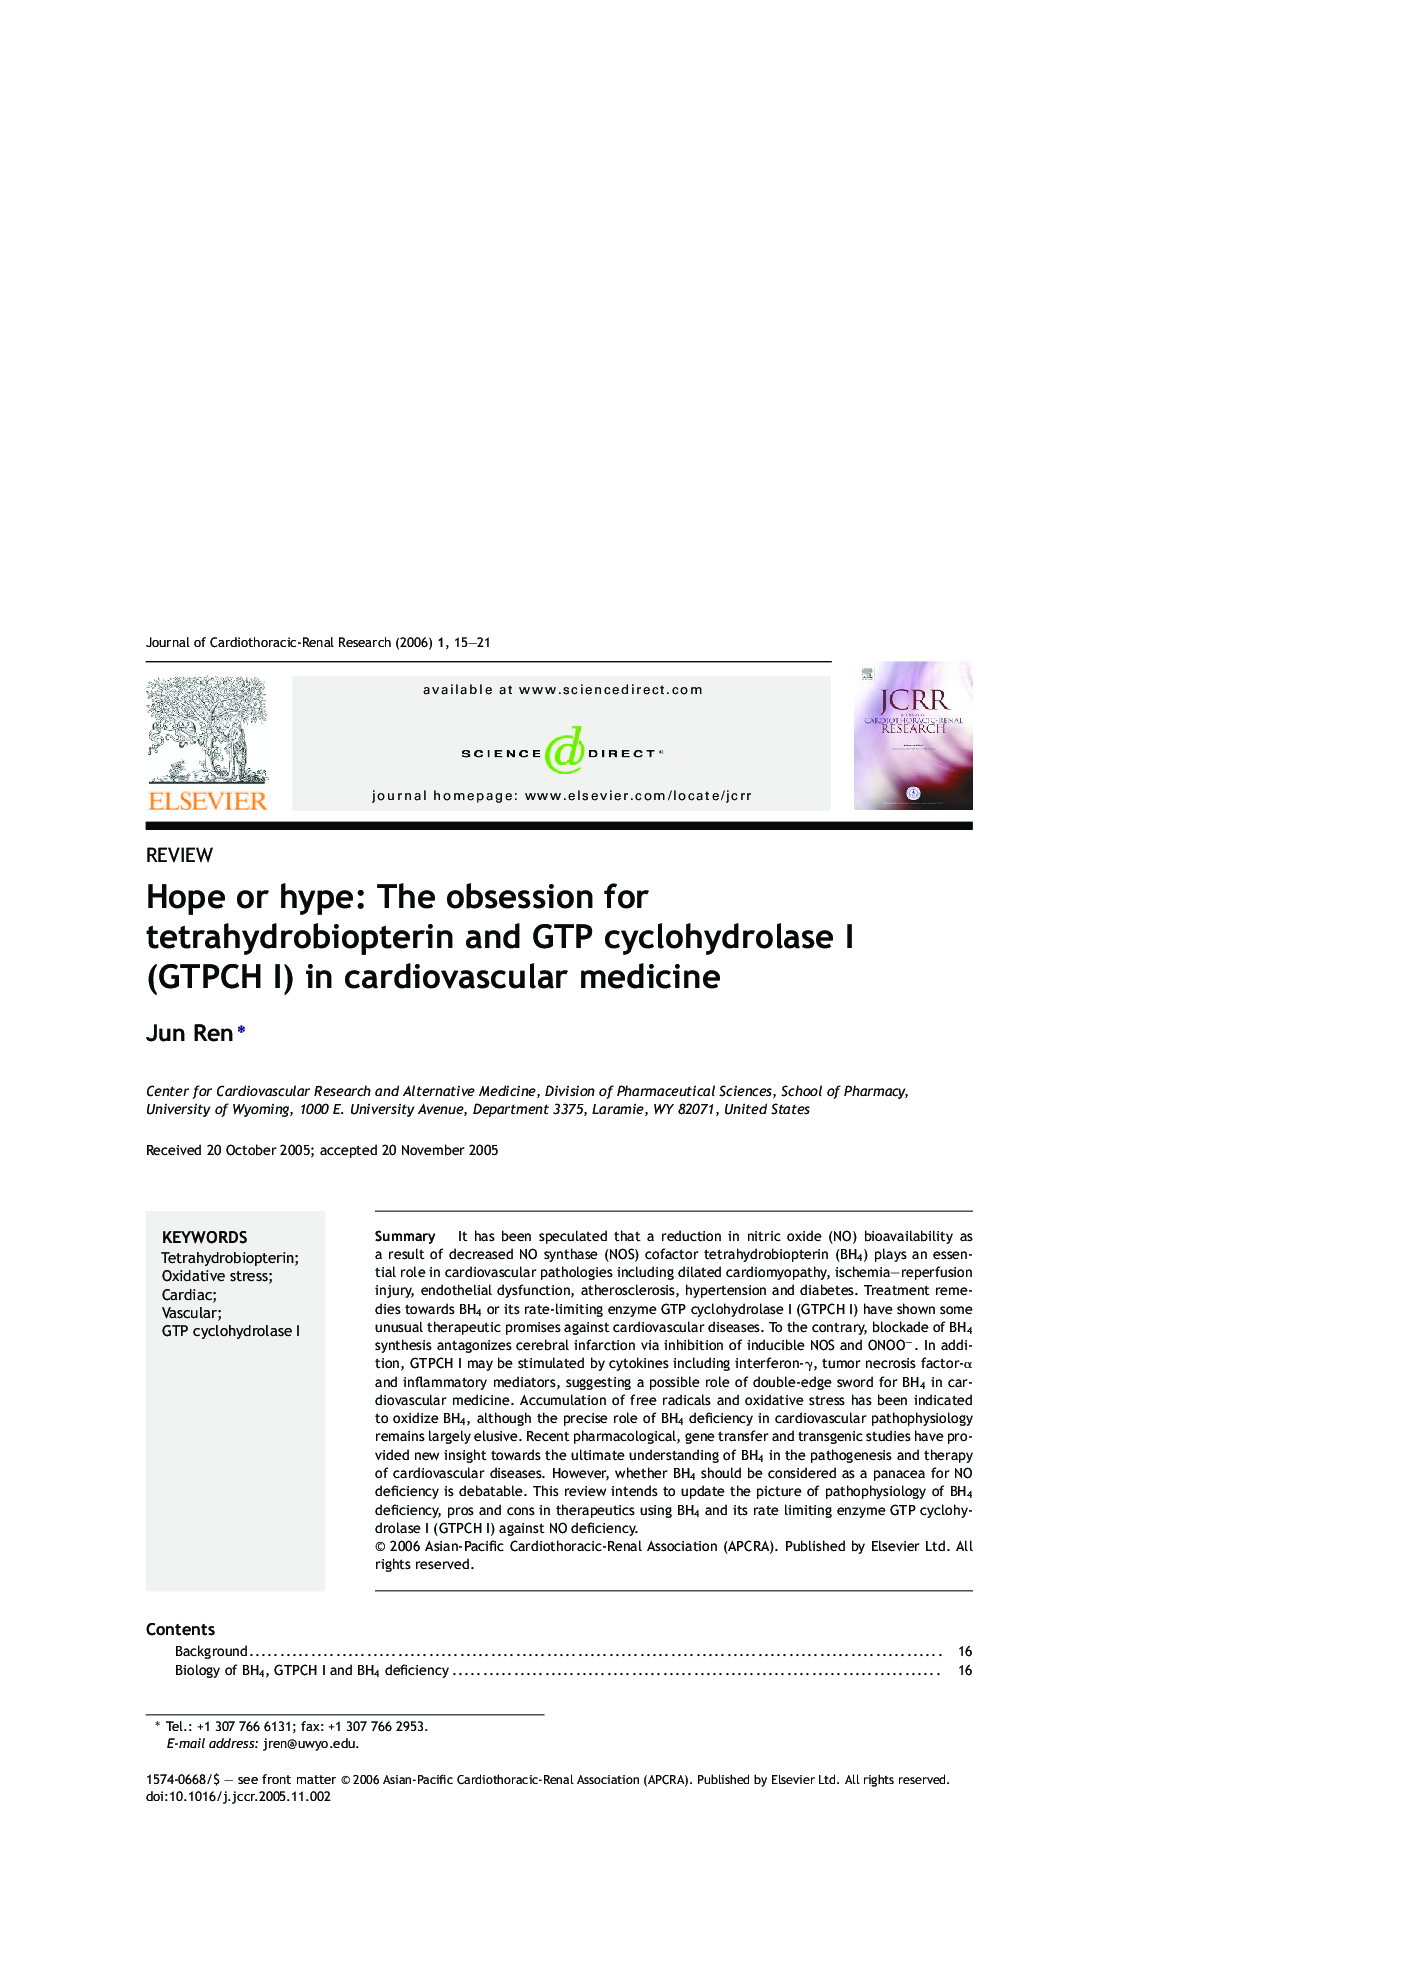 Hope or hype: The obsession for tetrahydrobiopterin and GTP cyclohydrolase I (GTPCH I) in cardiovascular medicine